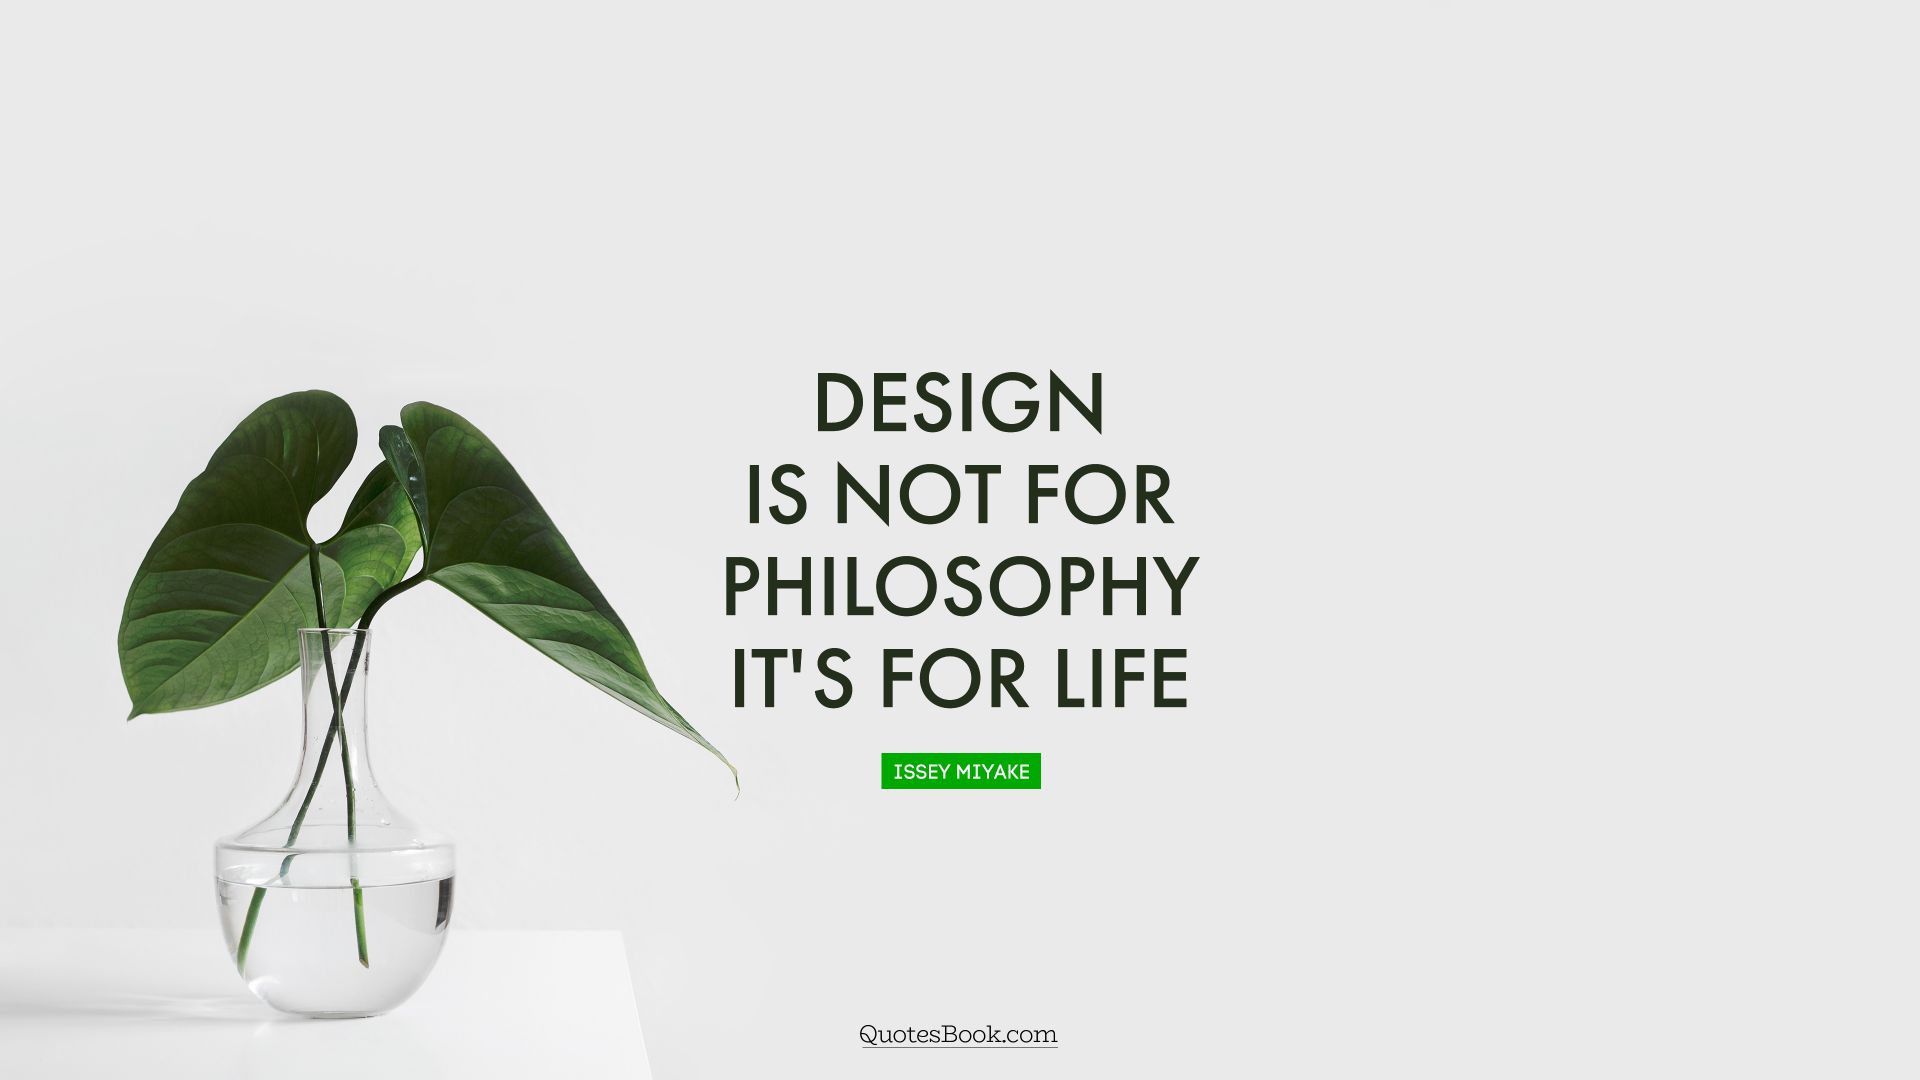 Design is not for philosophy it's for life. - Quote by Issey Miyake